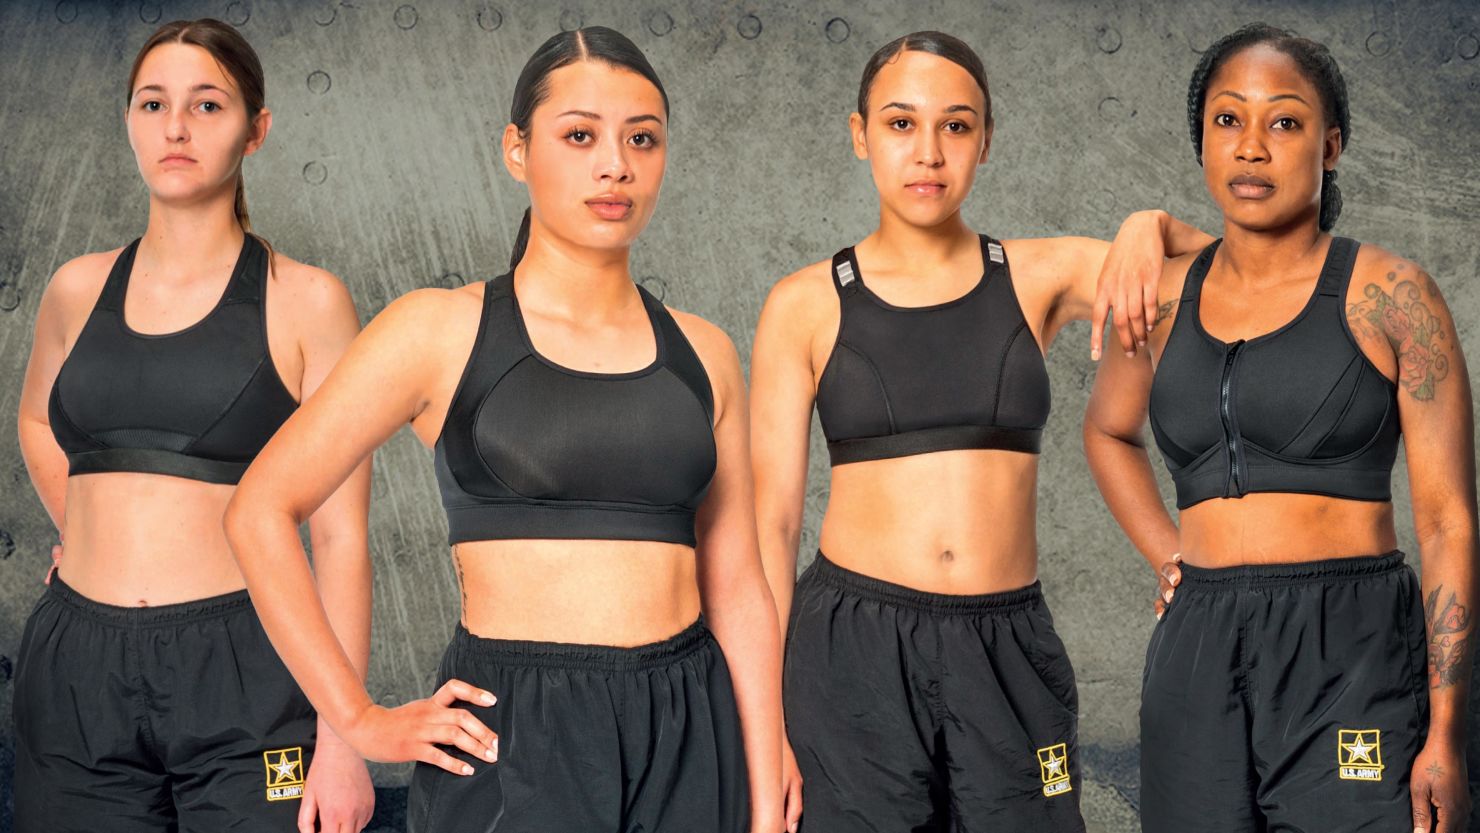 US Army is developing a tactical bra for its female soldiers